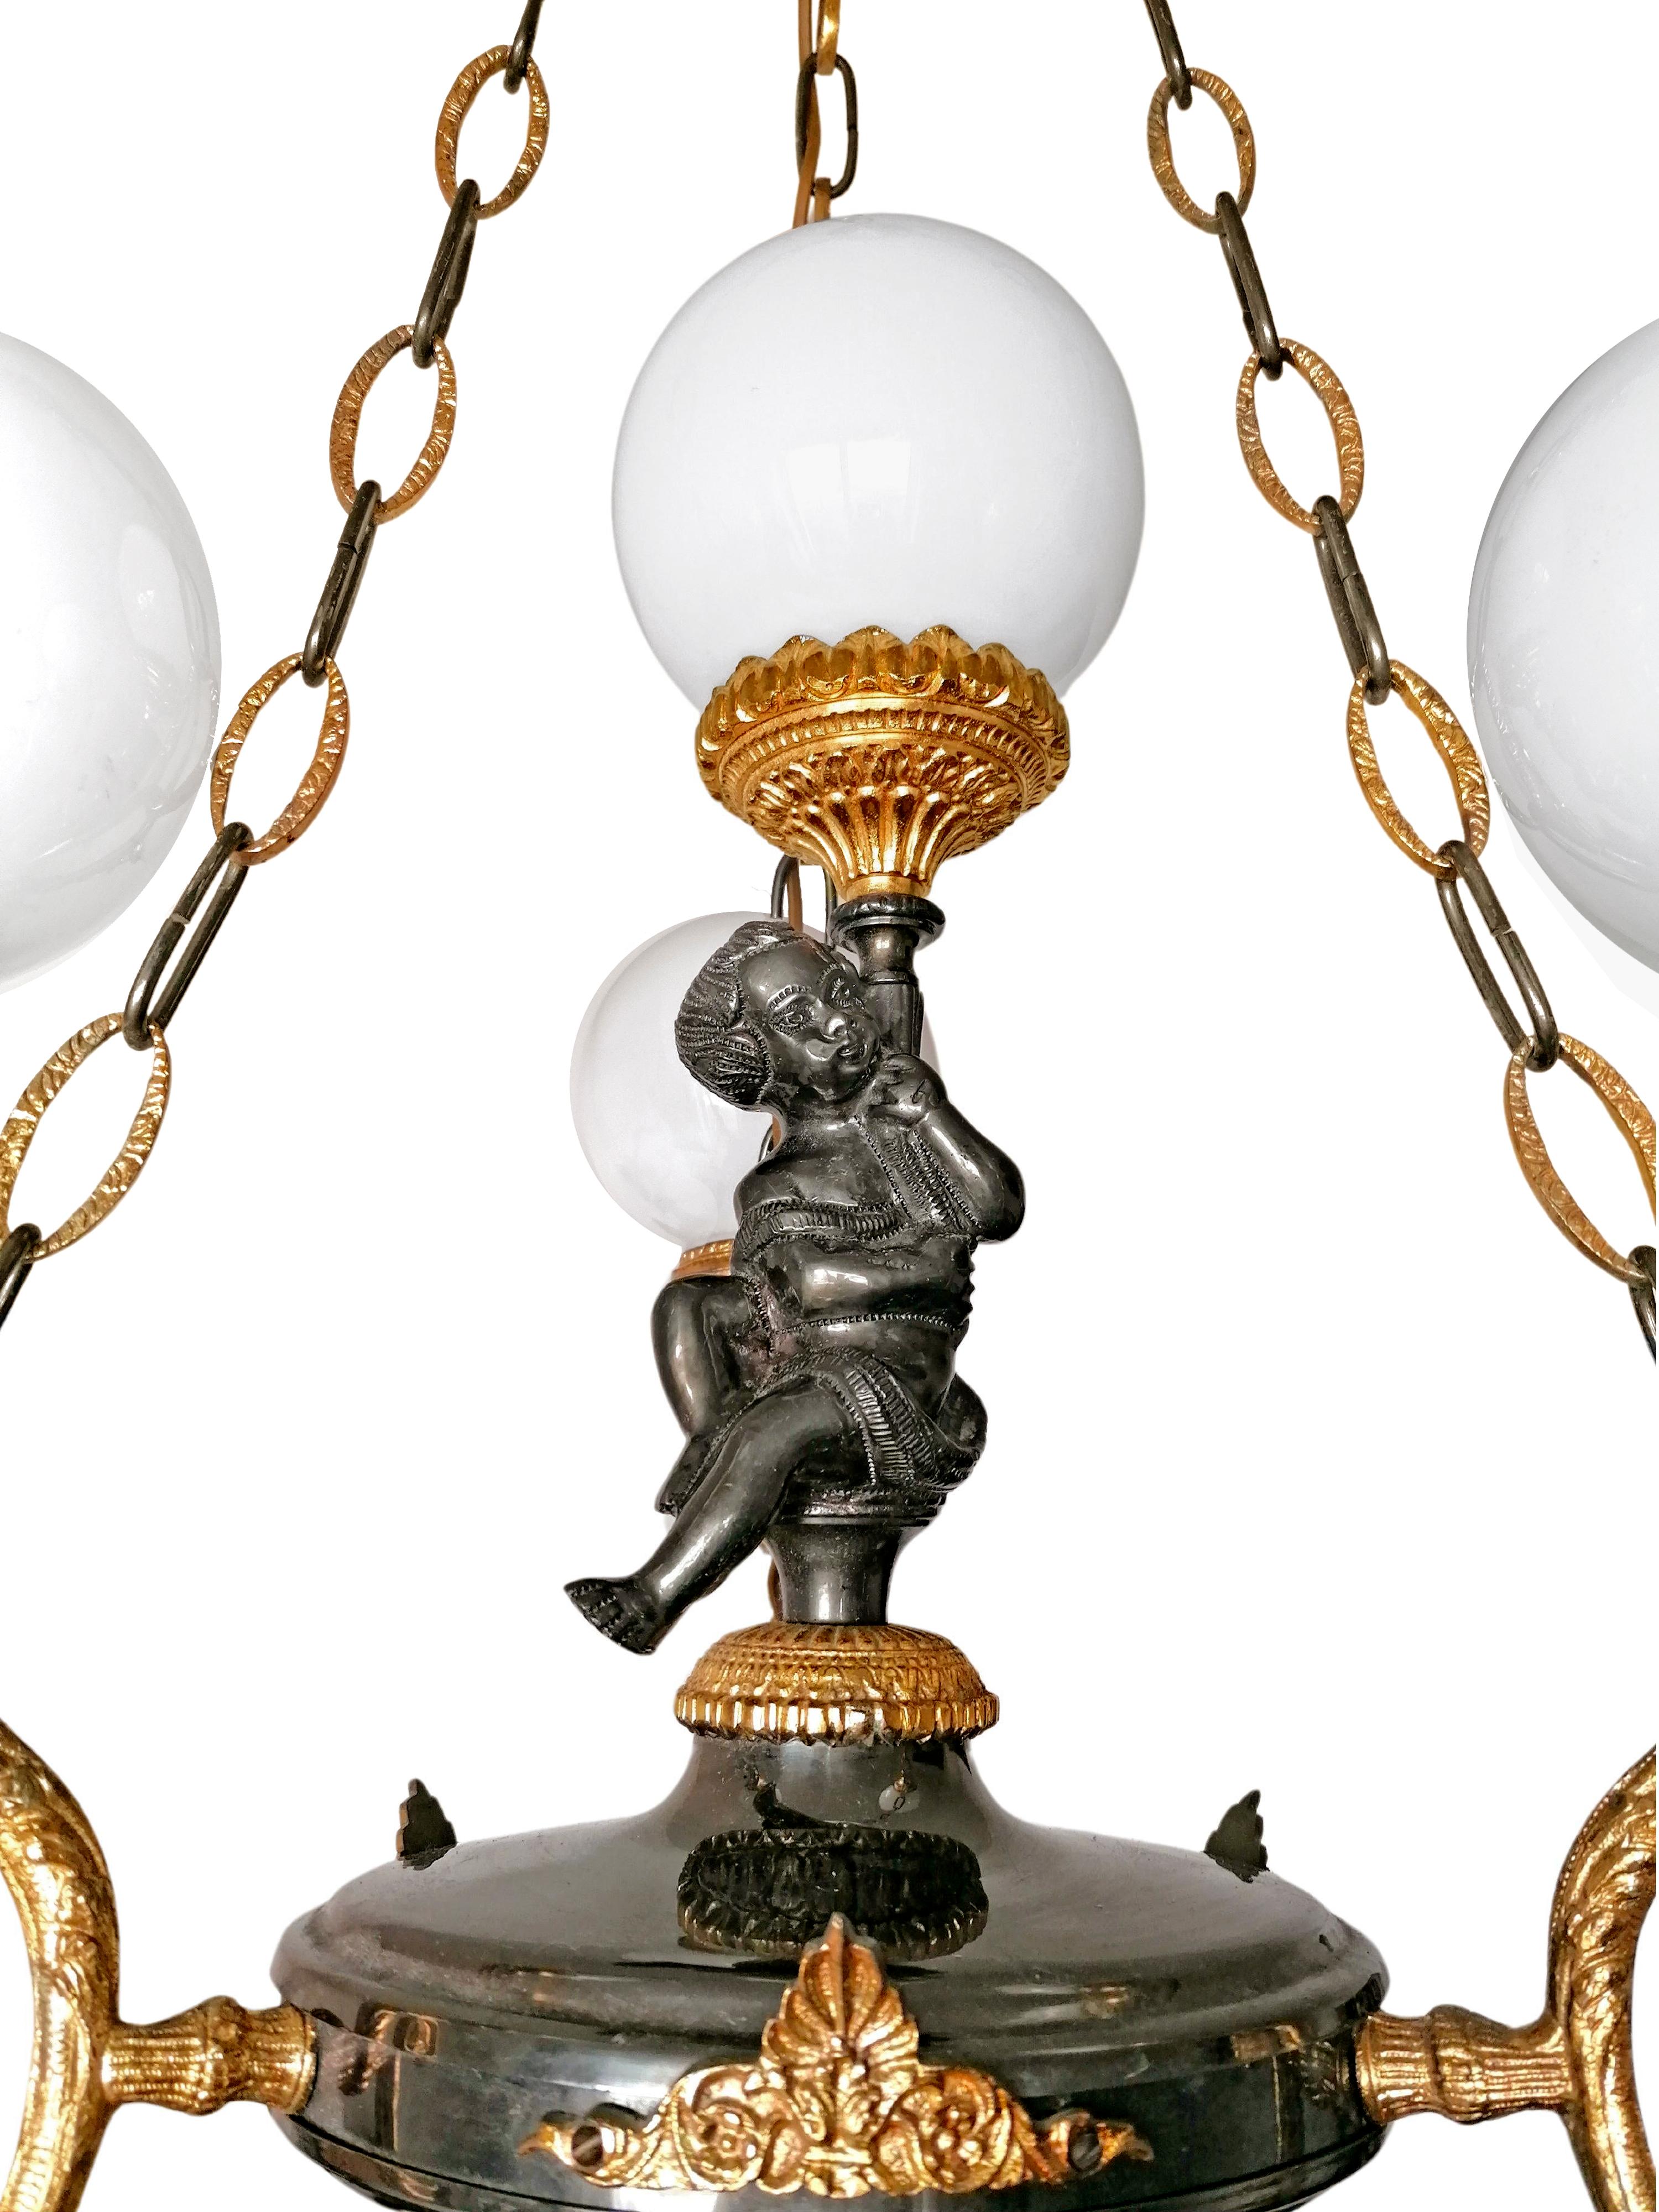 French Empire Neoclassical Cherub Putti Patinated & Gilt Solid Bronze Chandelier In Good Condition For Sale In Coimbra, PT